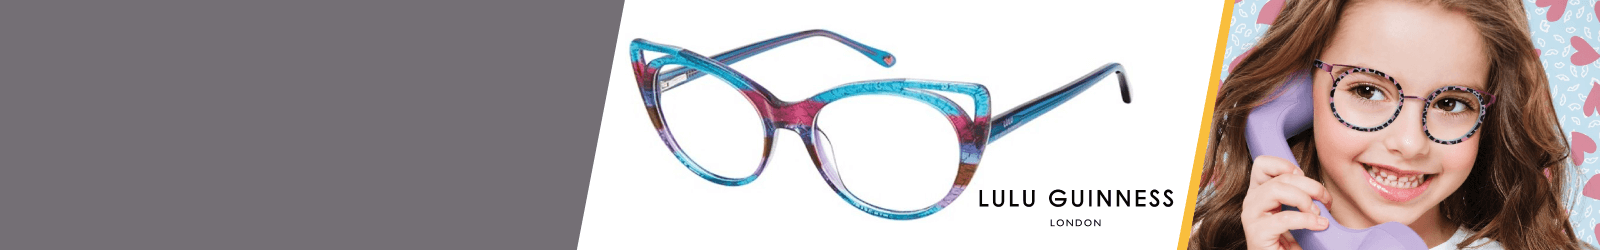 Havana Lulu Guinness Kids Glasses from 2 to 4-year-old